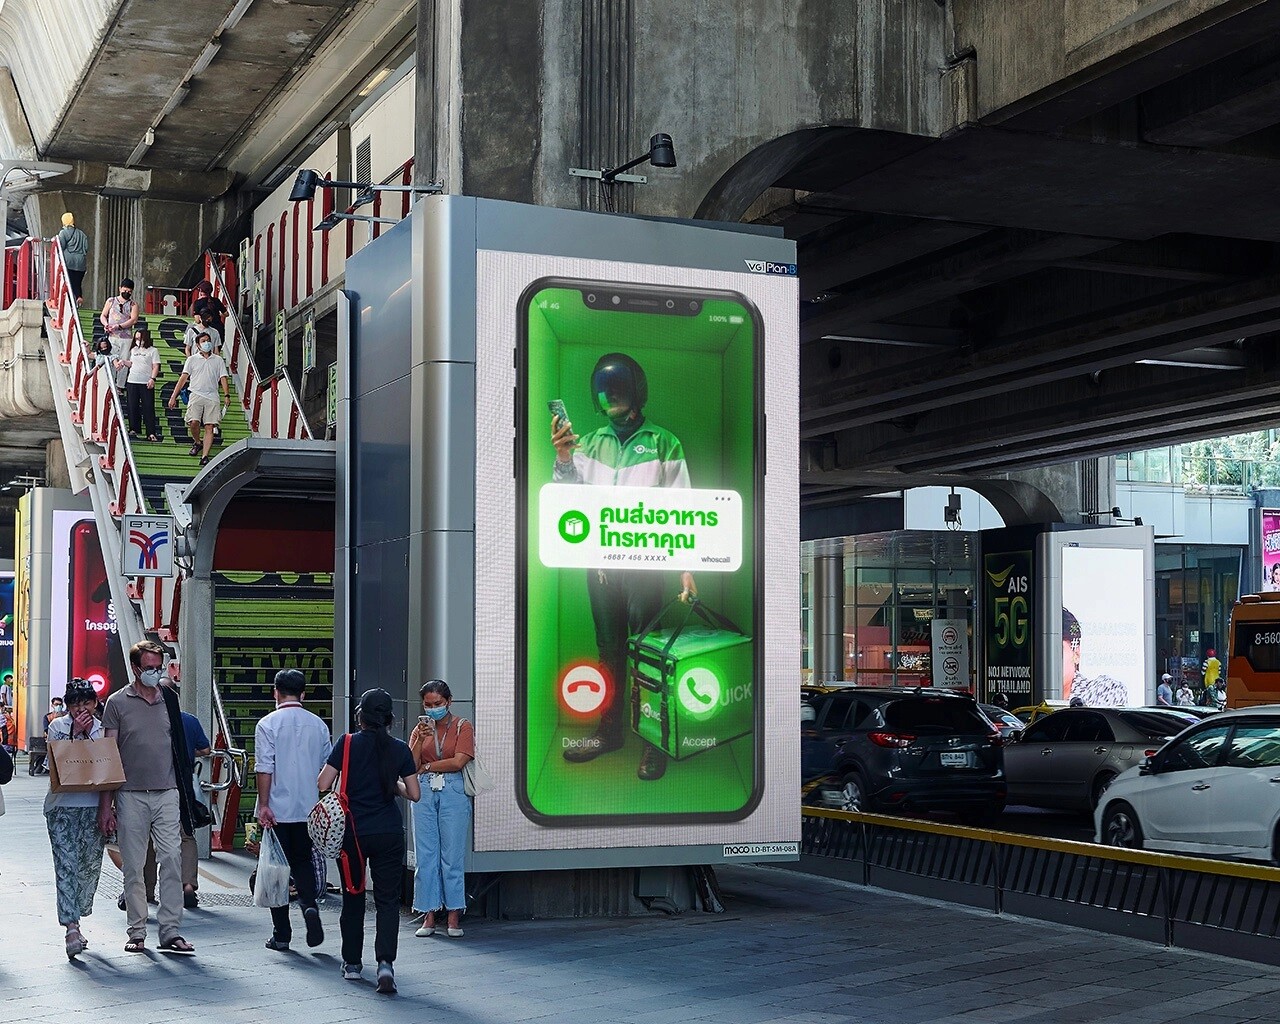 VGI x Sour Bangkok's "Whoscall: The Safety Stations" Campaign Clinched "Best Use of Audio" from Asia's Prestigious Festival of Media APAC Awards Ceremony 2023